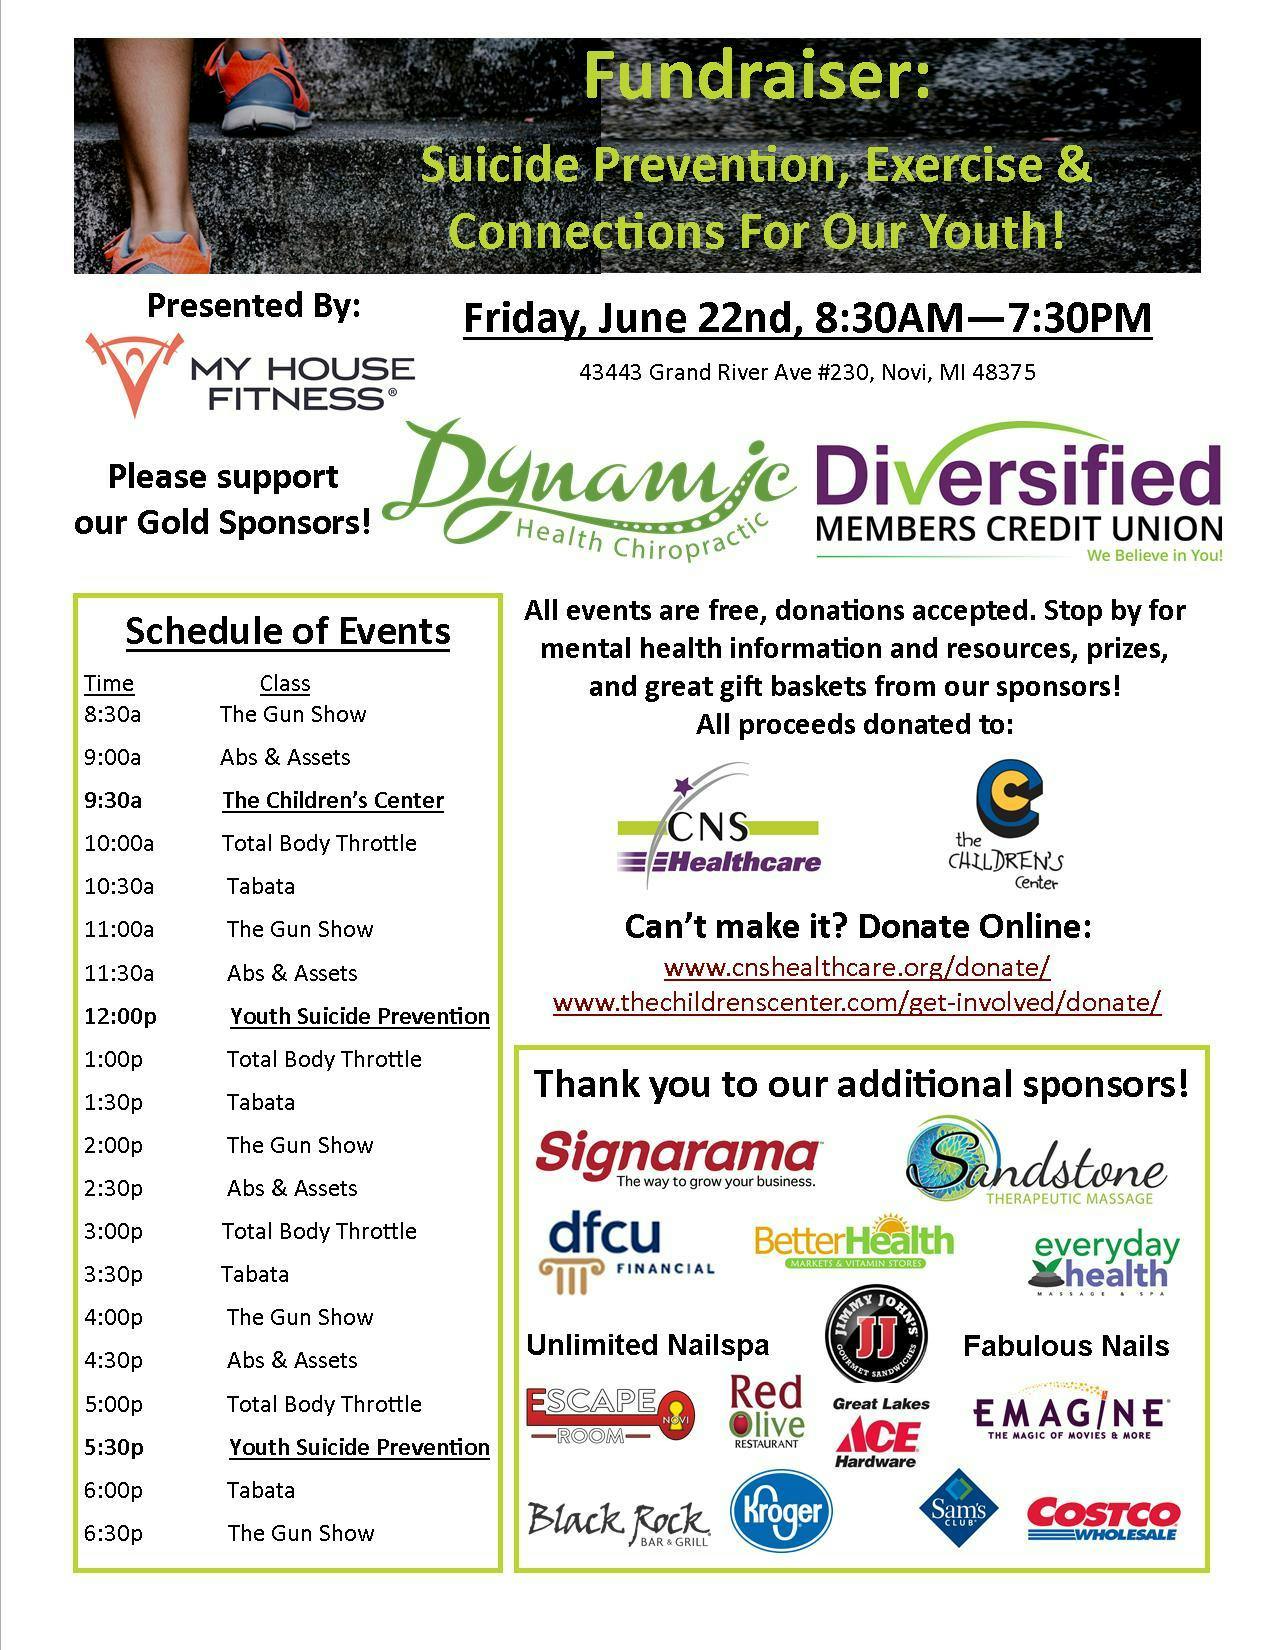 Fundraiser: Suicide Prevention, Exercise & Connections for our Youth!